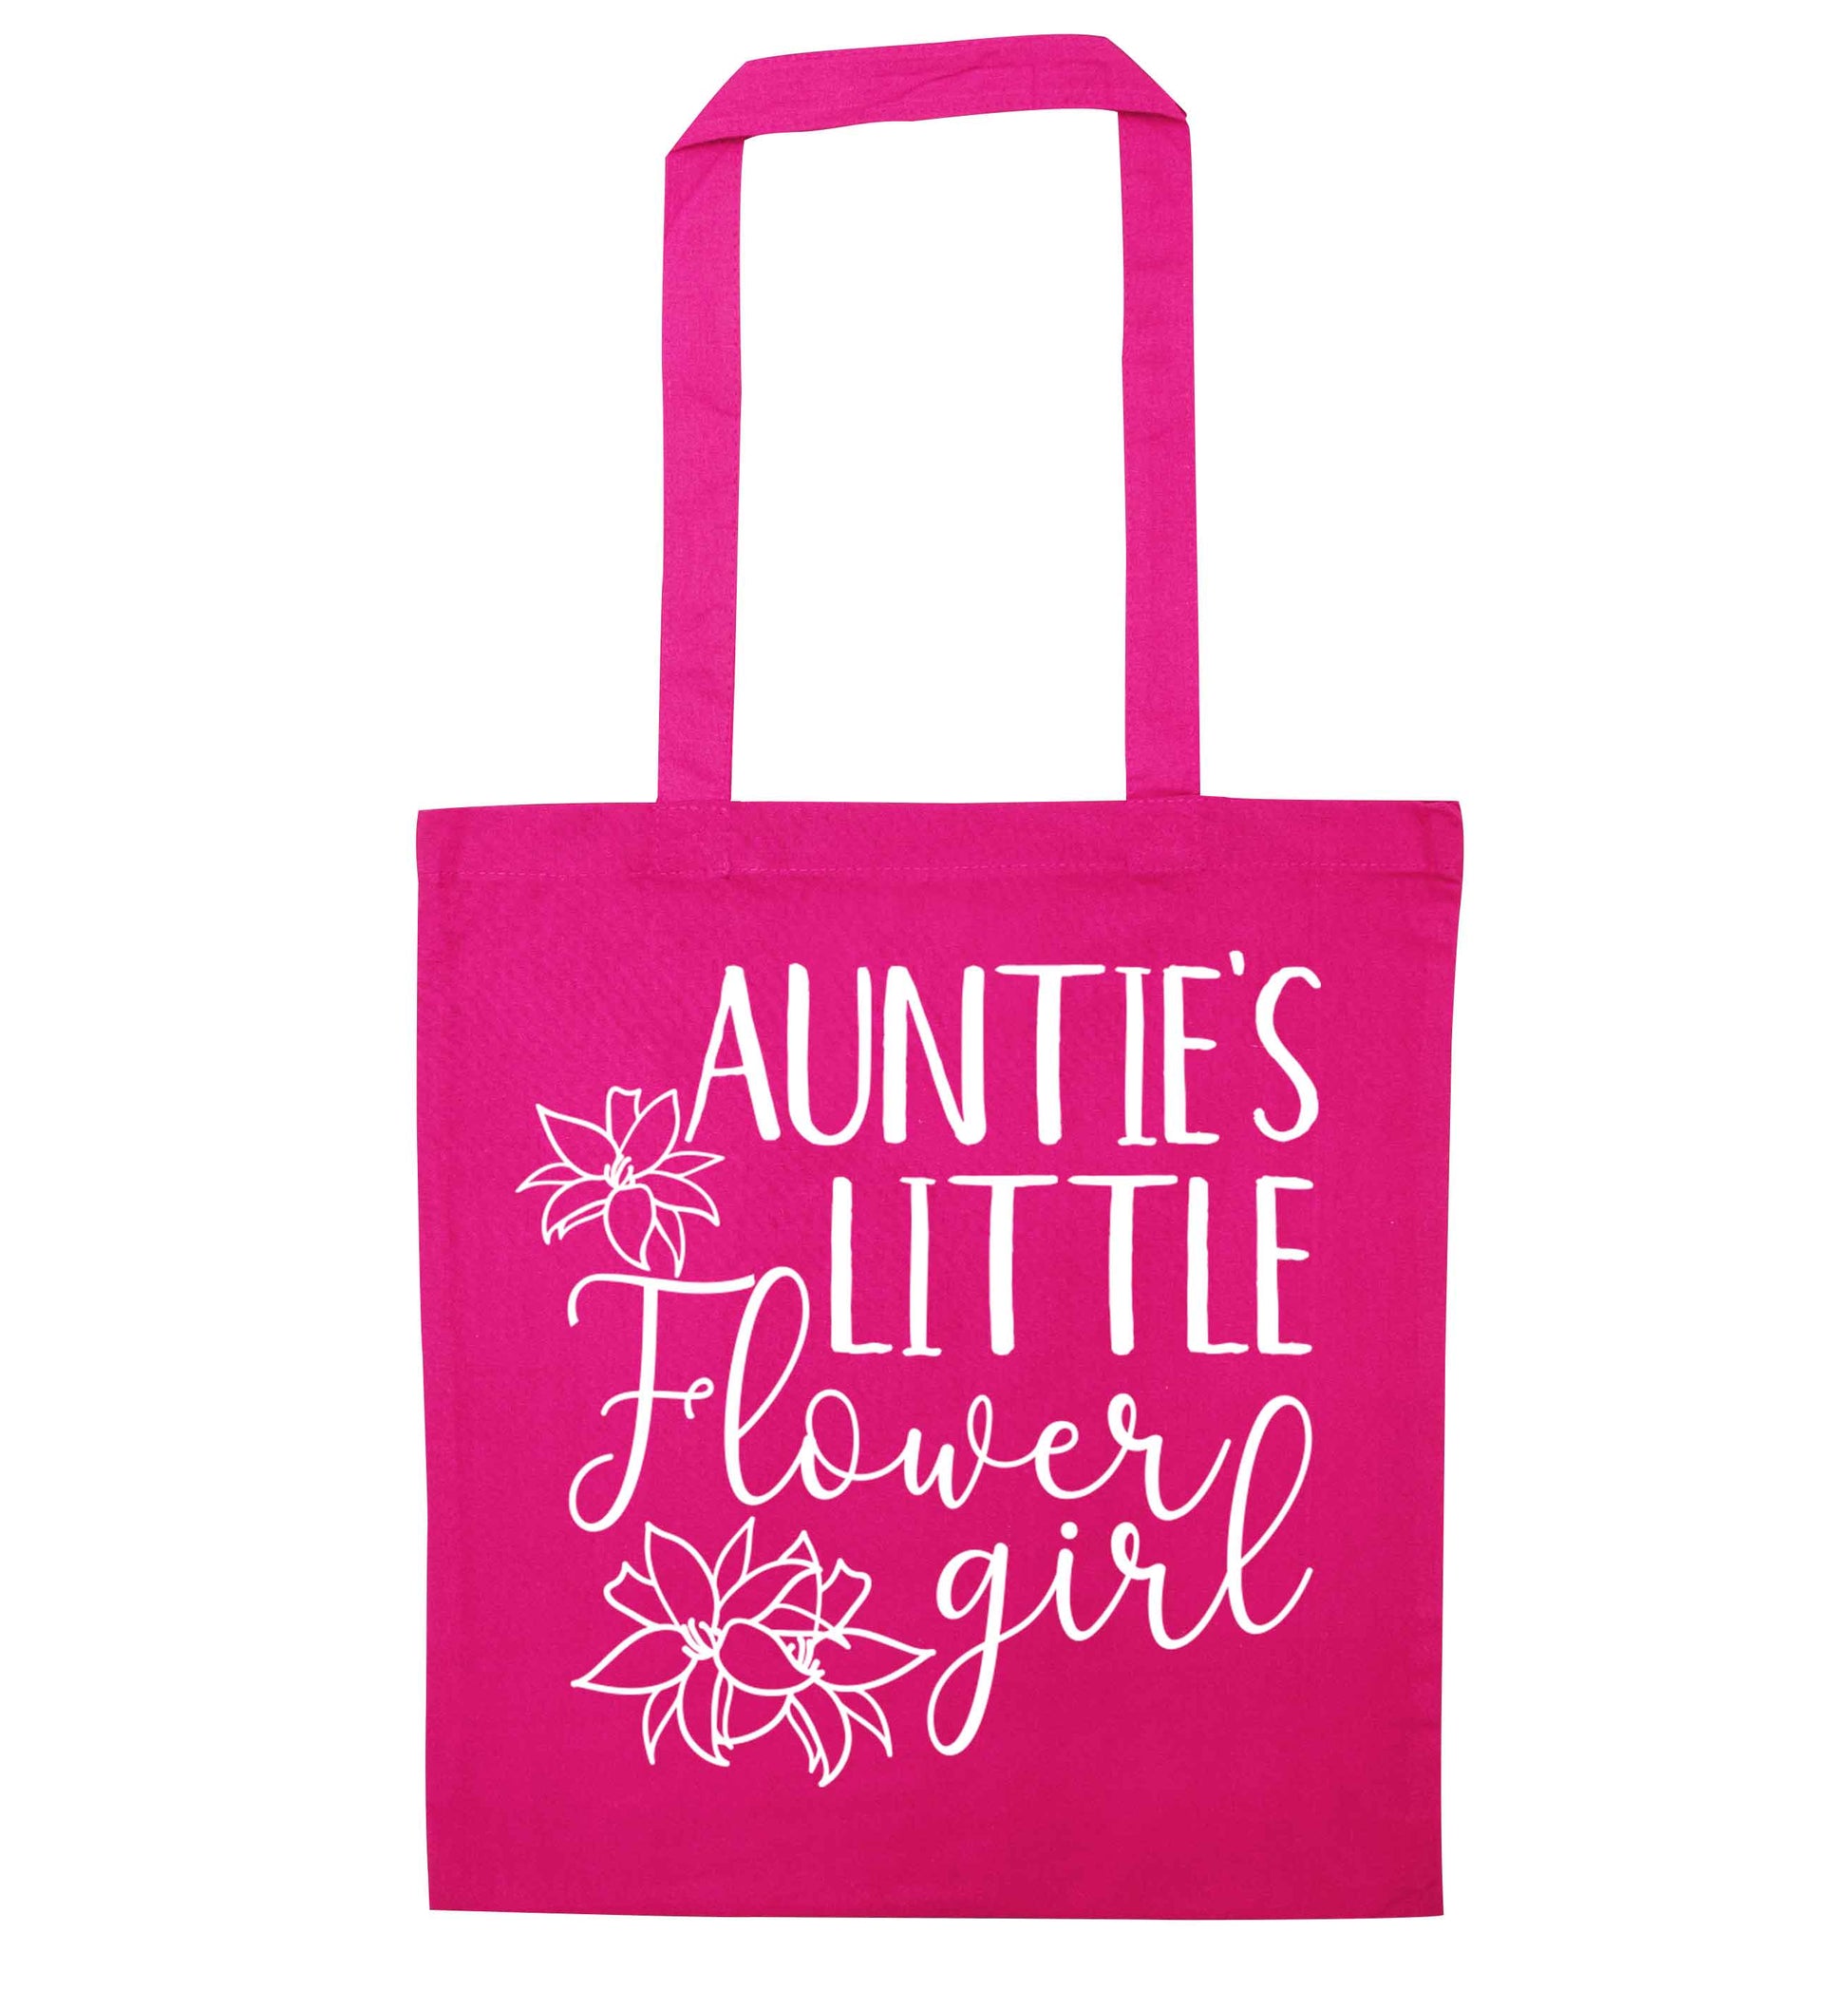 Perfect wedding guest favours or hen party gifts! Personalised bridal floral wreath designs, any name, any role! pink tote bag